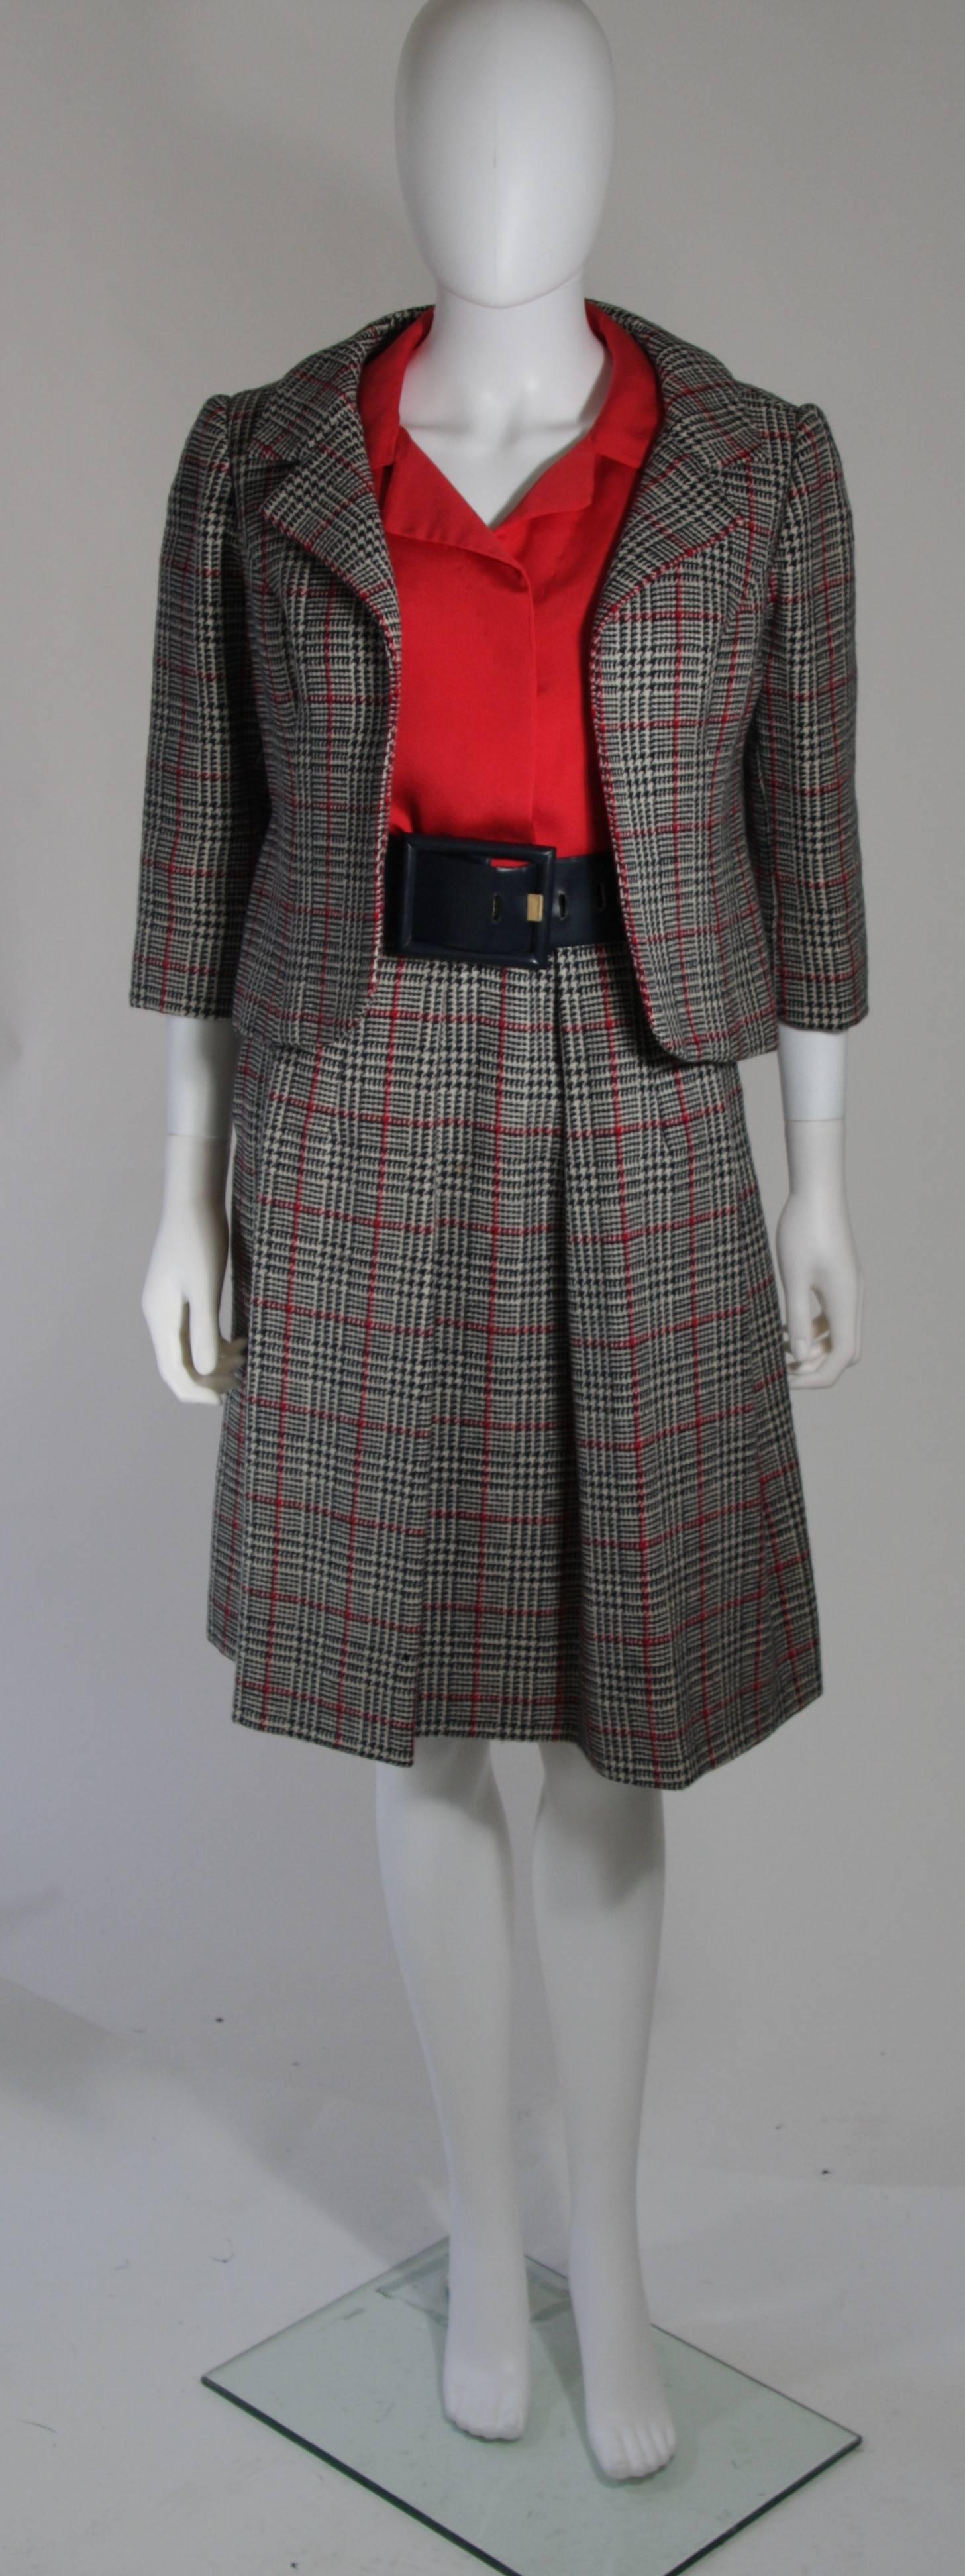 This Galanos skirt suit is composed of a plaid wool in red, white, and black. The blouse (designed by Dorothy Veeder) is composed of a red silk and has center front snap closures. The jacket has an open style. The skirt features a pleated front and